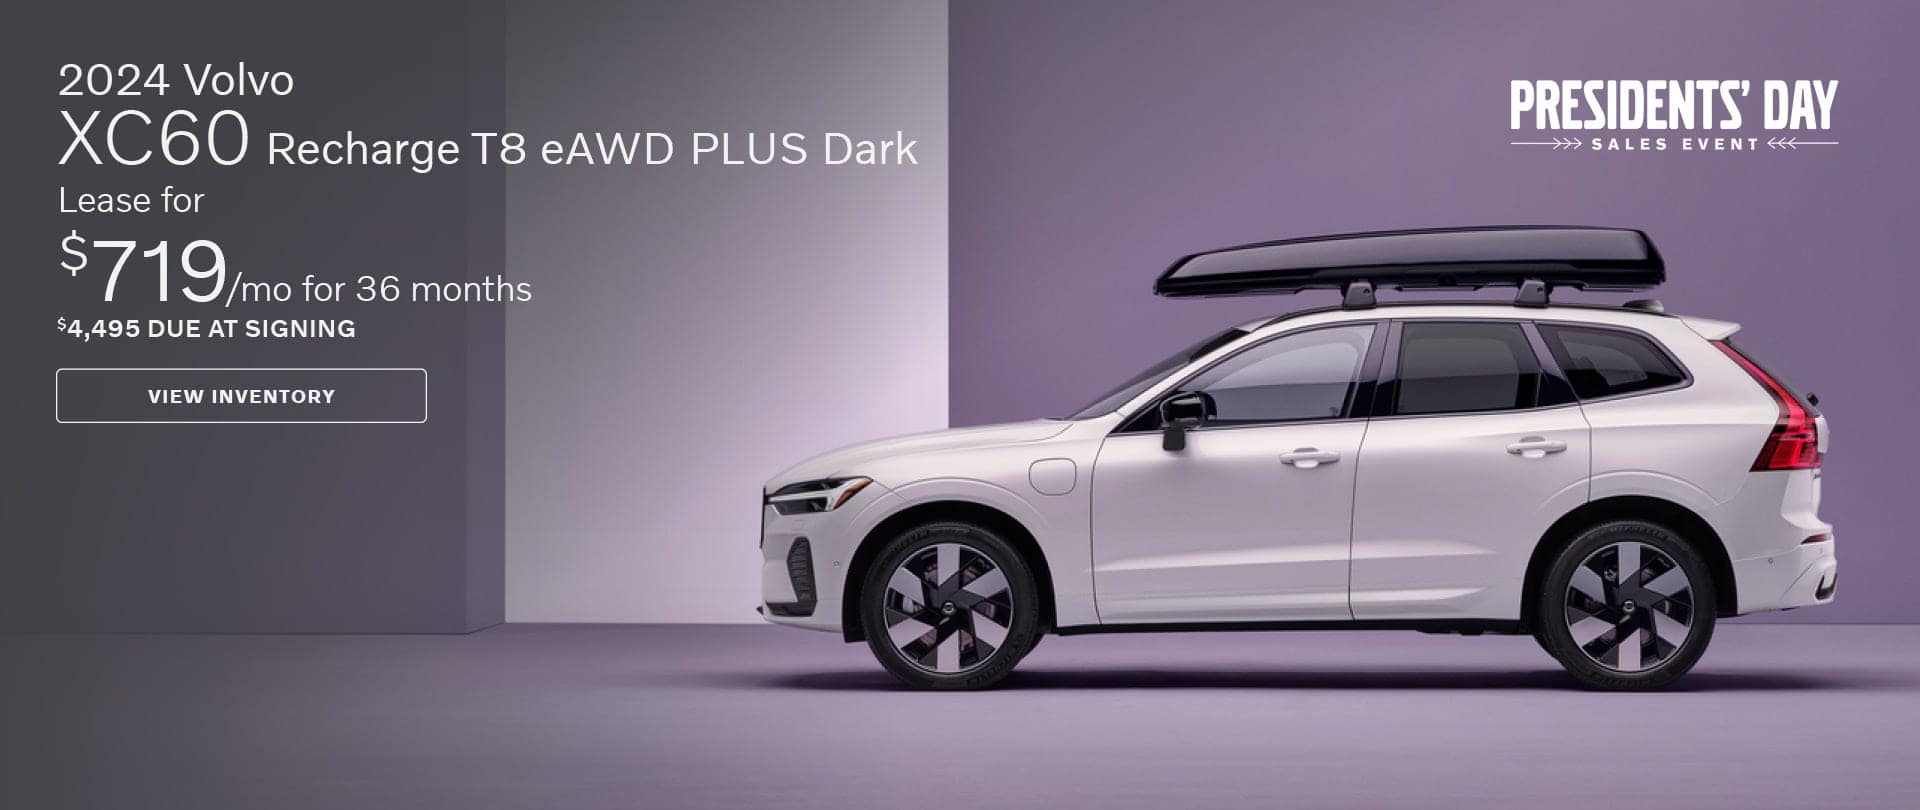 Volvo XC60 Recharge offer